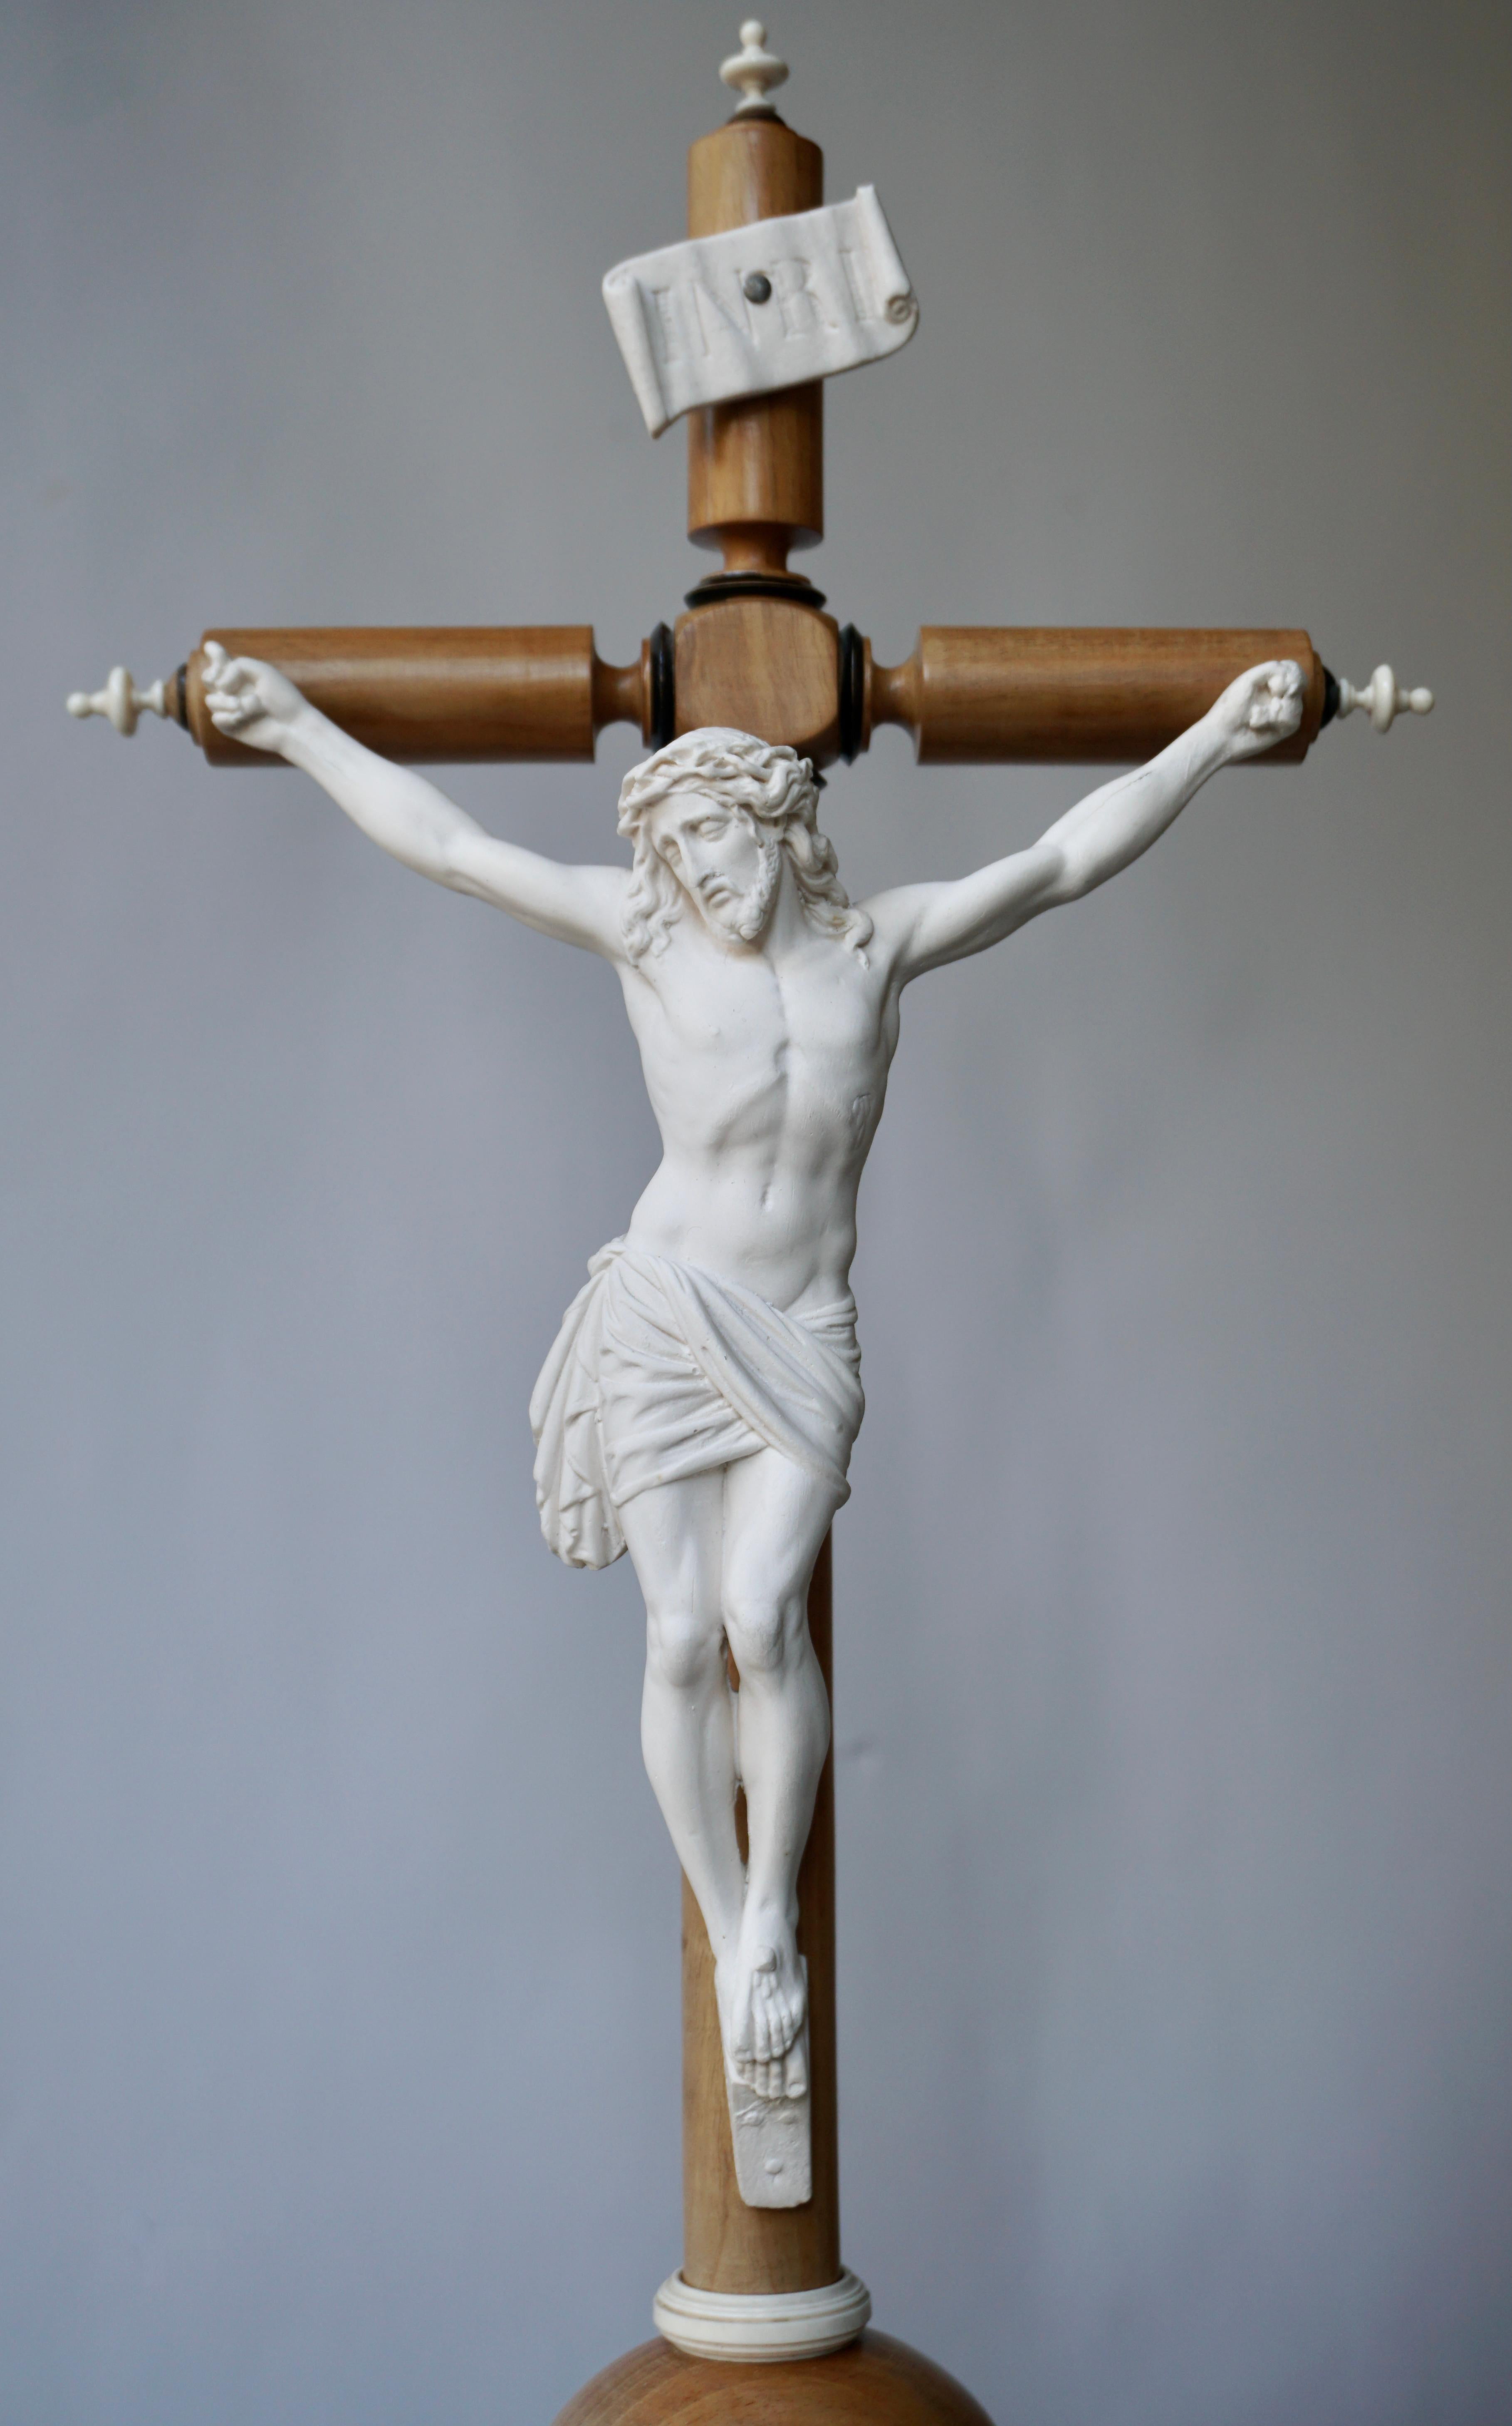 19th century French antique wood crucifix with a porcelain bisque figure of Christ.
Signed G M.